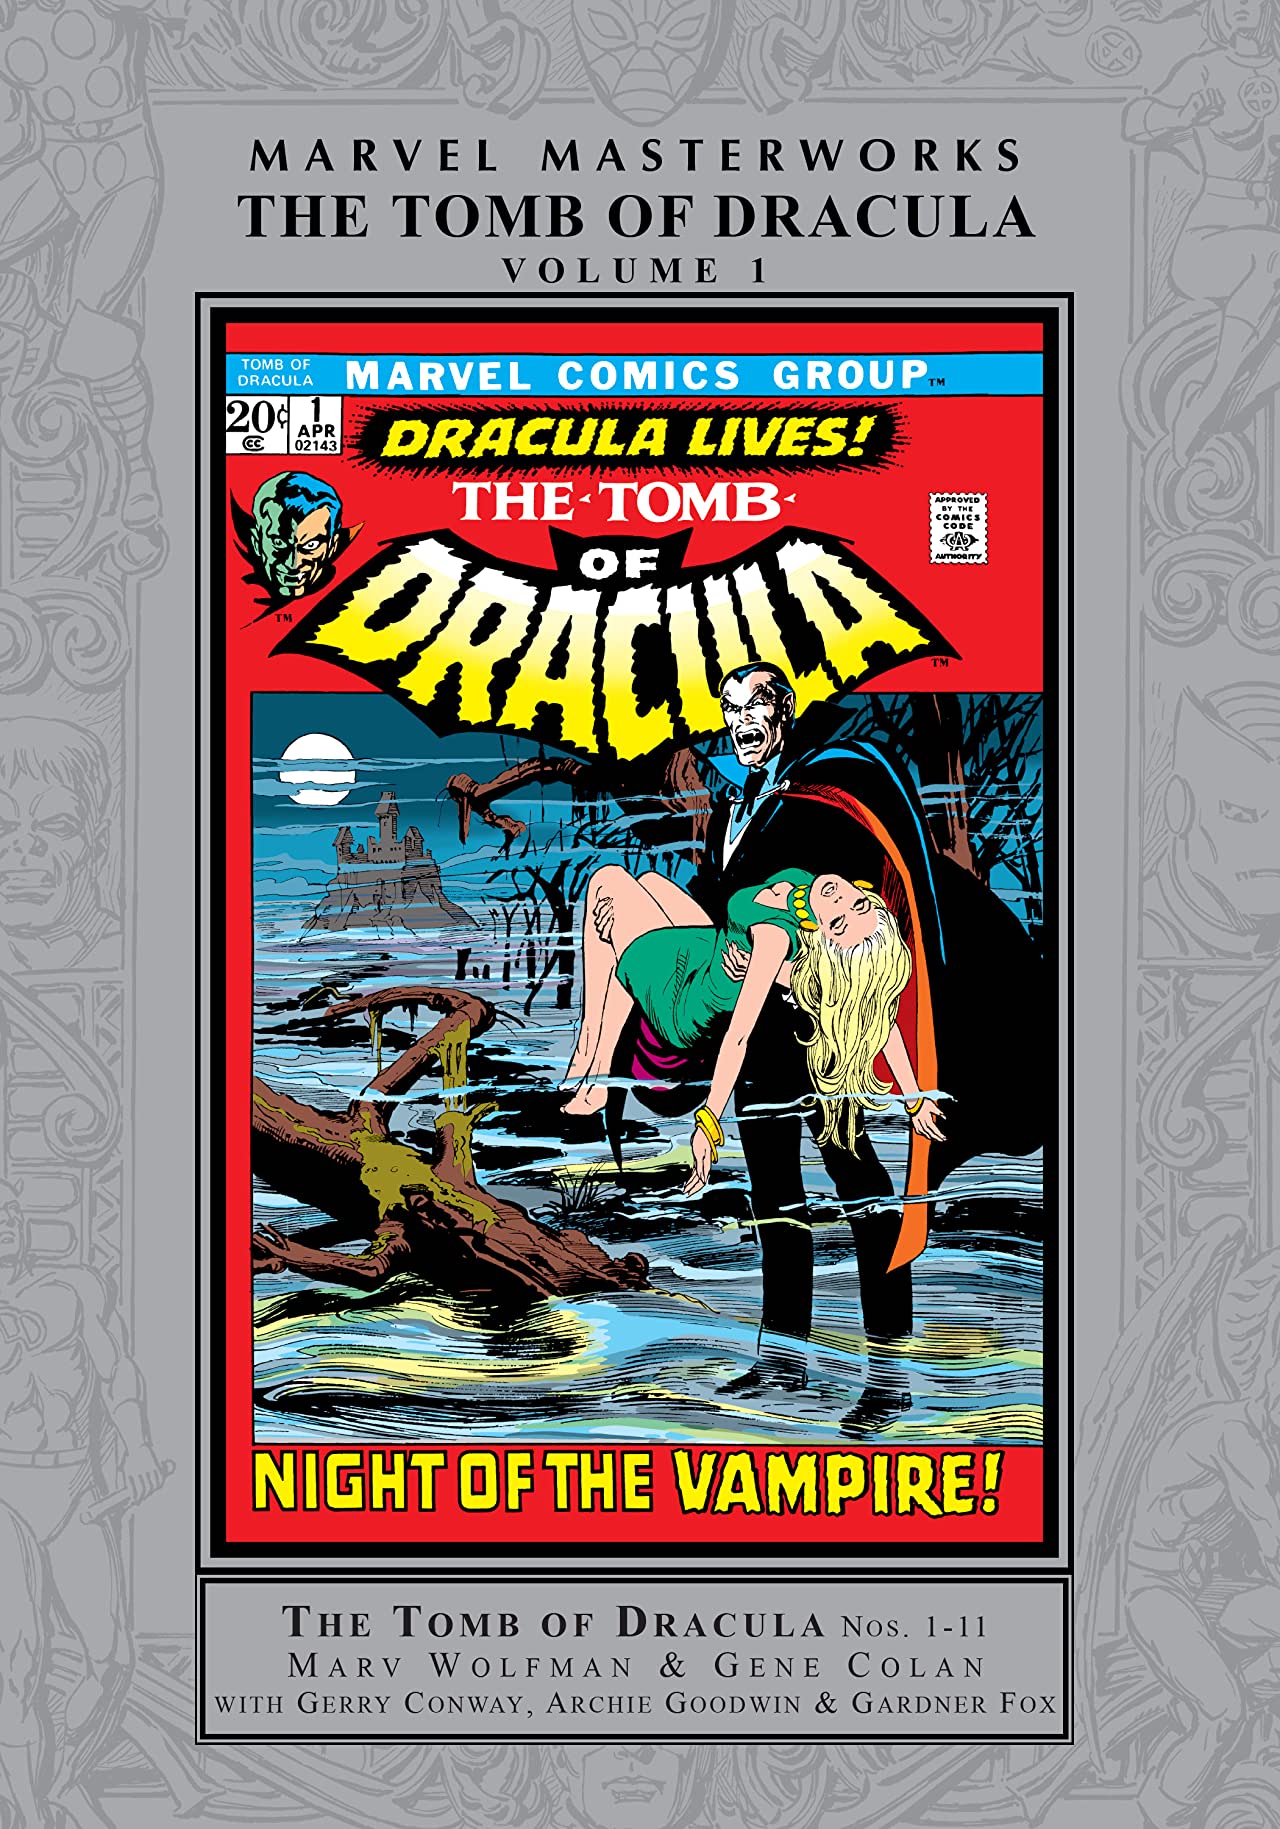 Marvel Masterworks: The Tomb Of Dracula Vol. 1 (Hardcover)